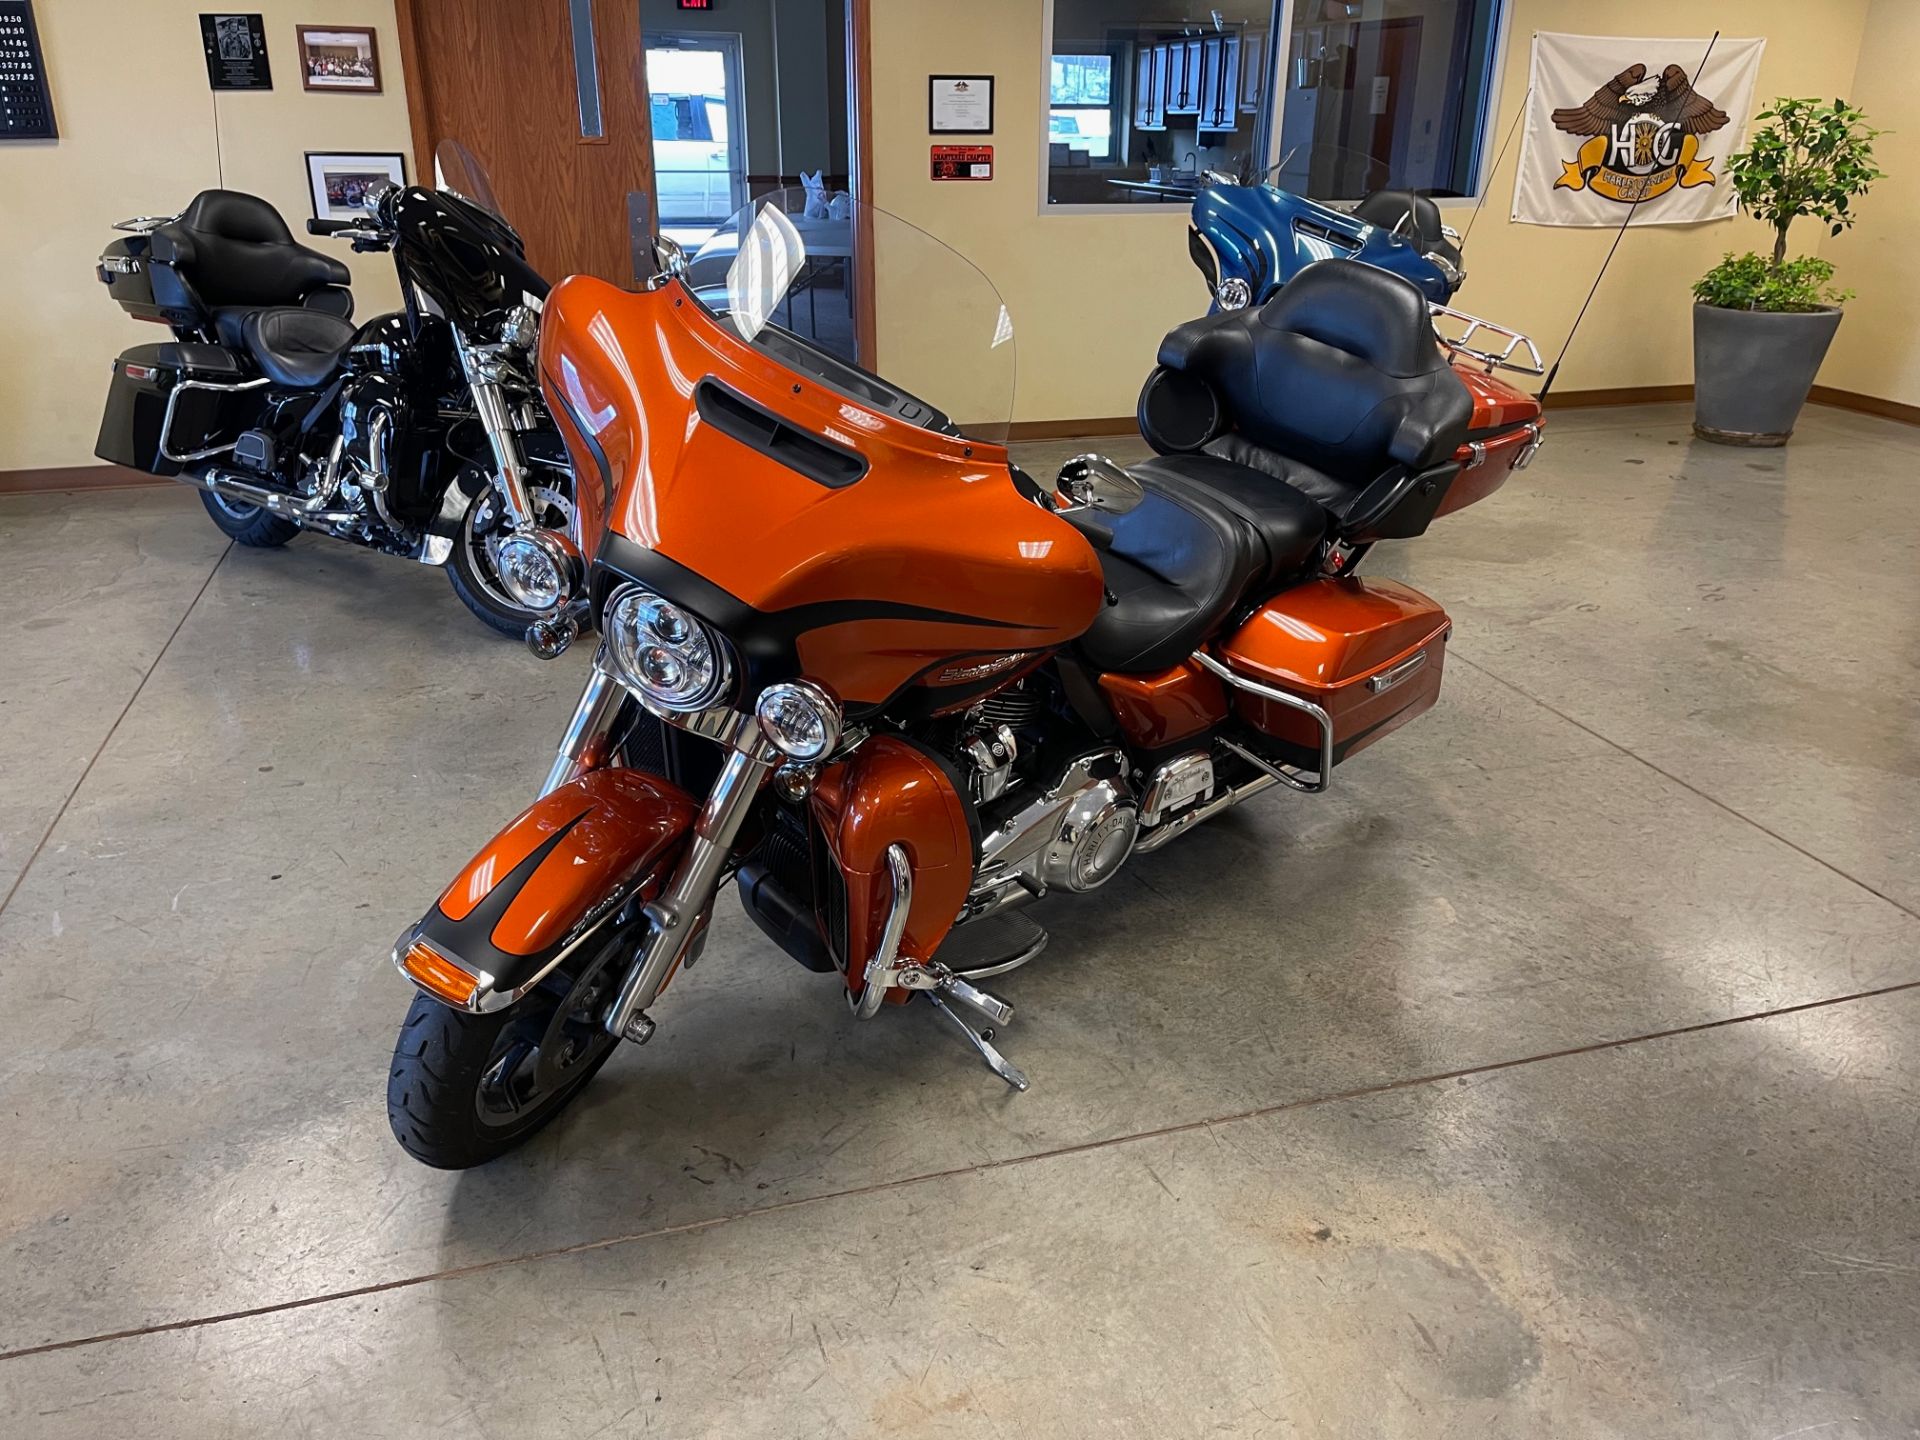 2019 Harley-Davidson Ultra Limited in Williamstown, West Virginia - Photo 4